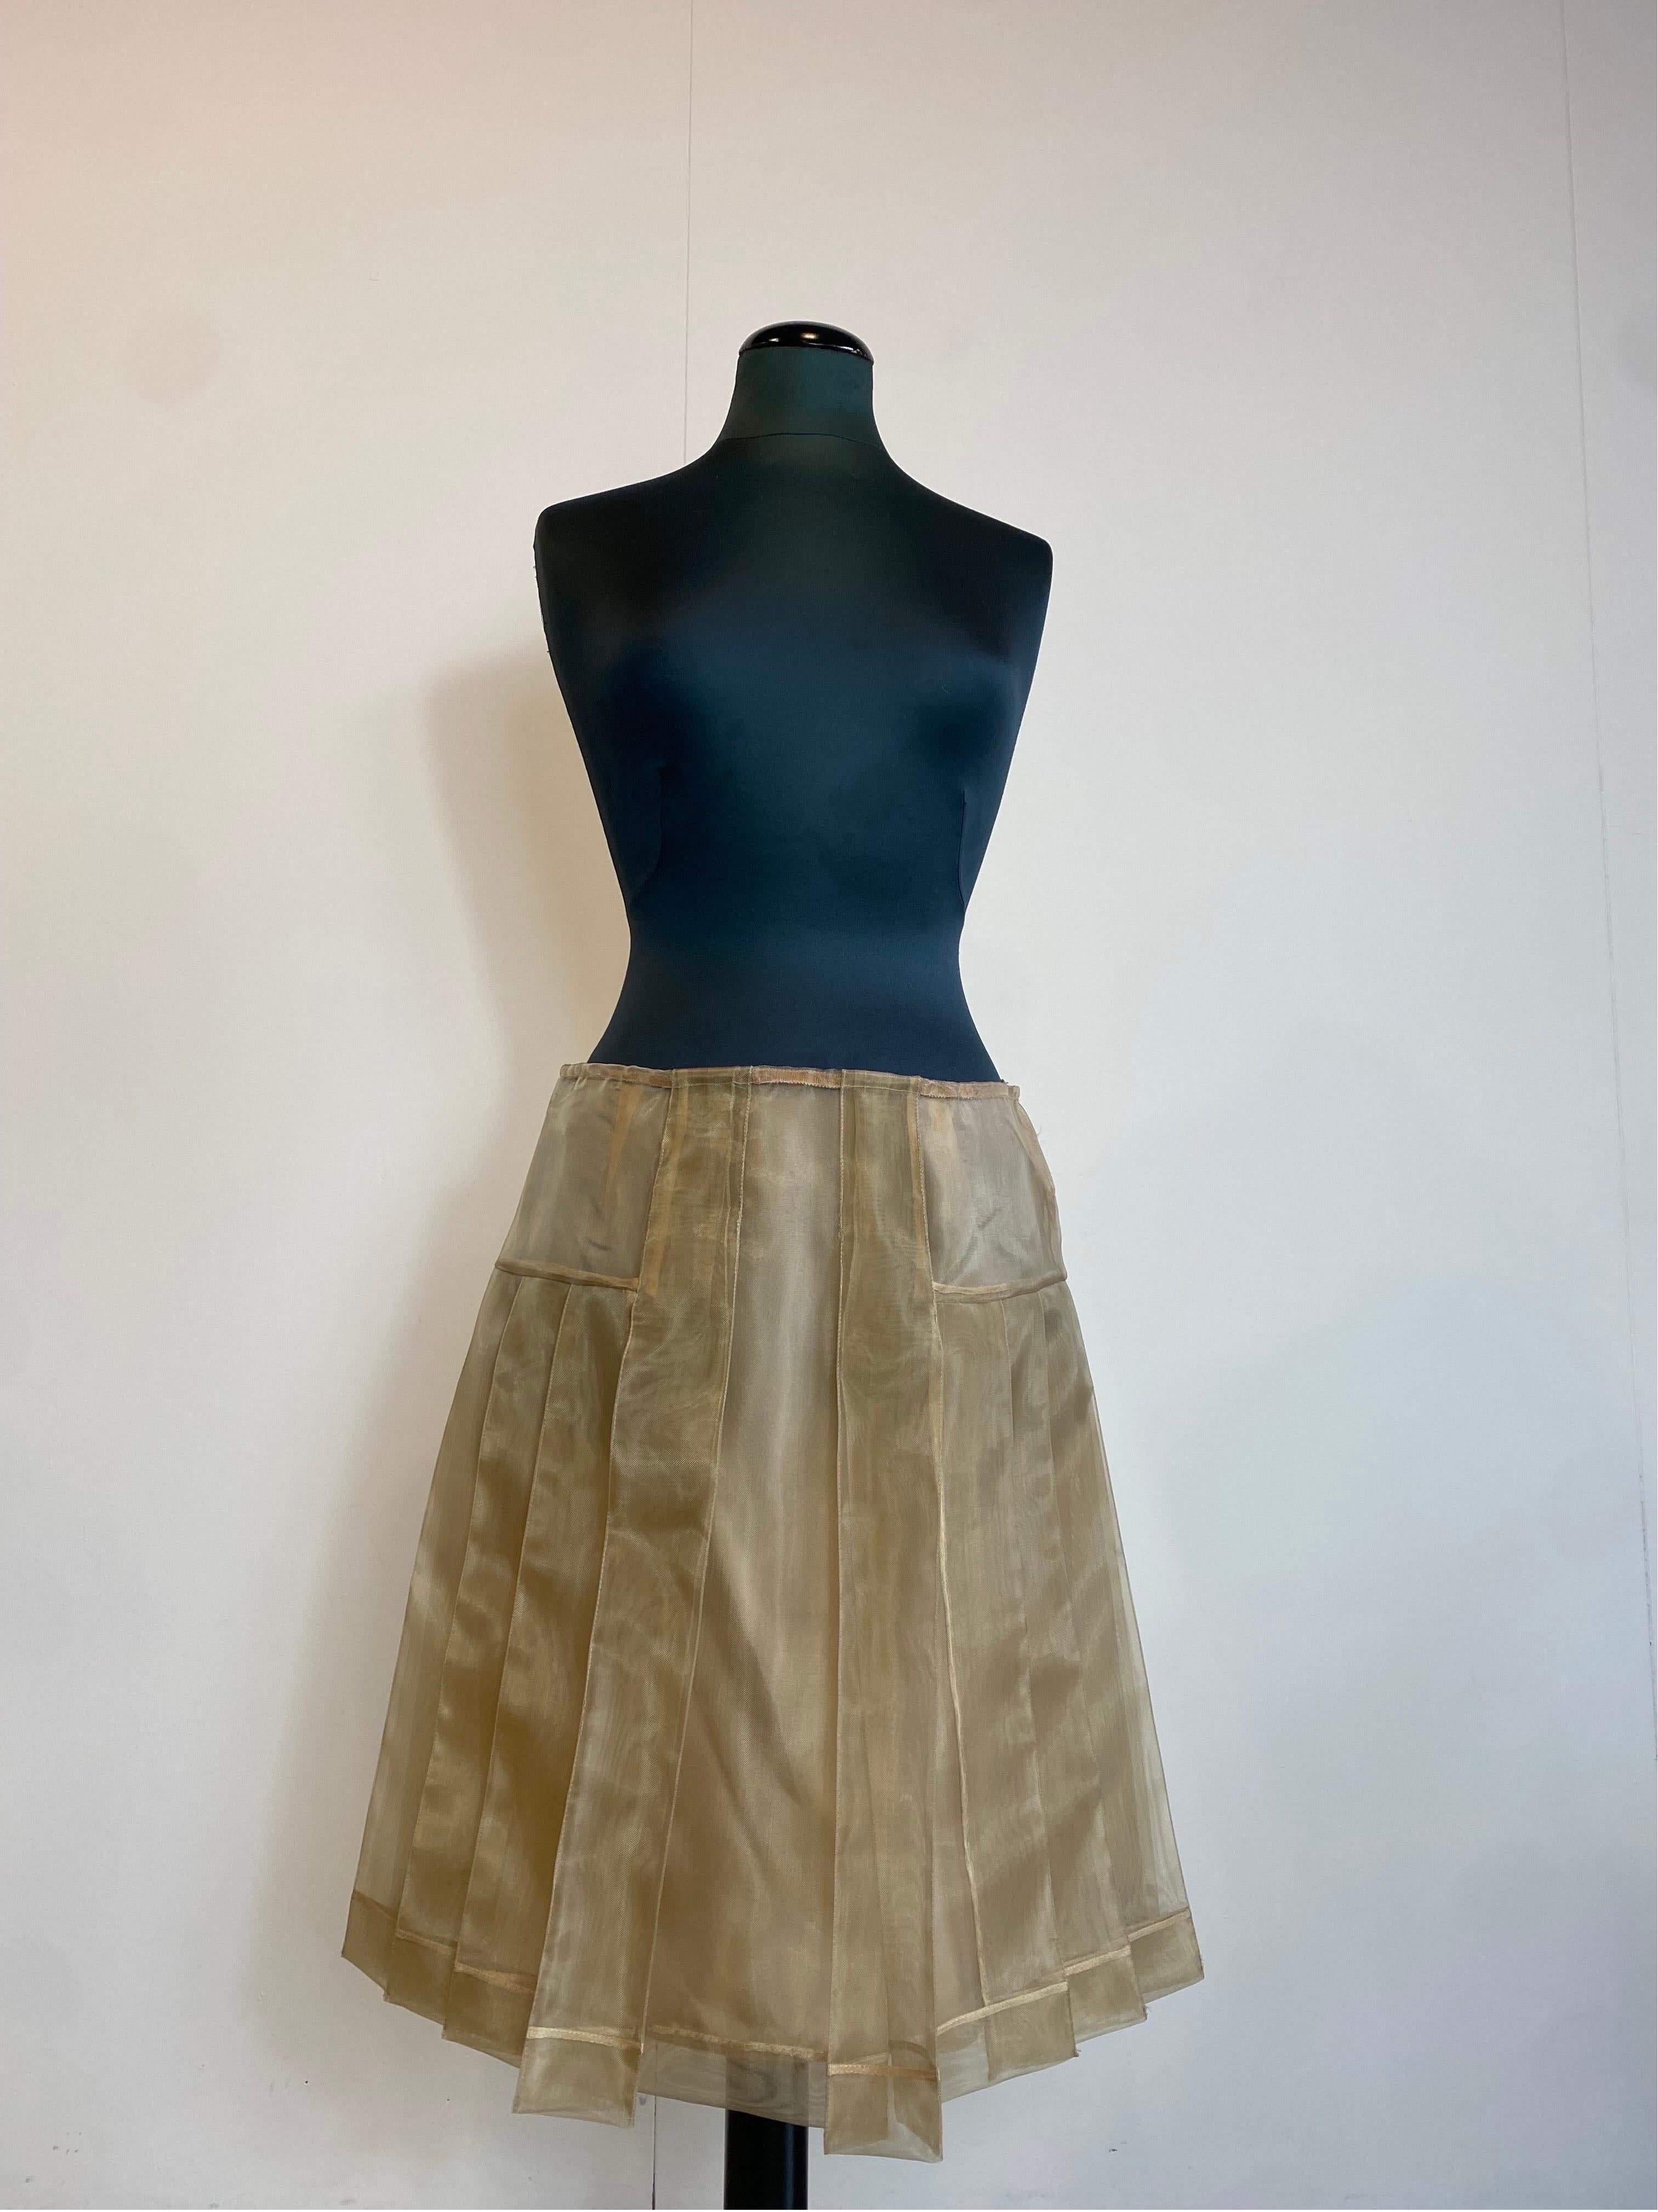 MIUMIU skirt.
Spring summer 2000 collection.
Made of polyamide. With silk underskirt (has some pulled threads).
Italian size 42.
Waist 42cm
Length 57 cm
New, still has original brand tag and 10 Corso Como where it was purchased.